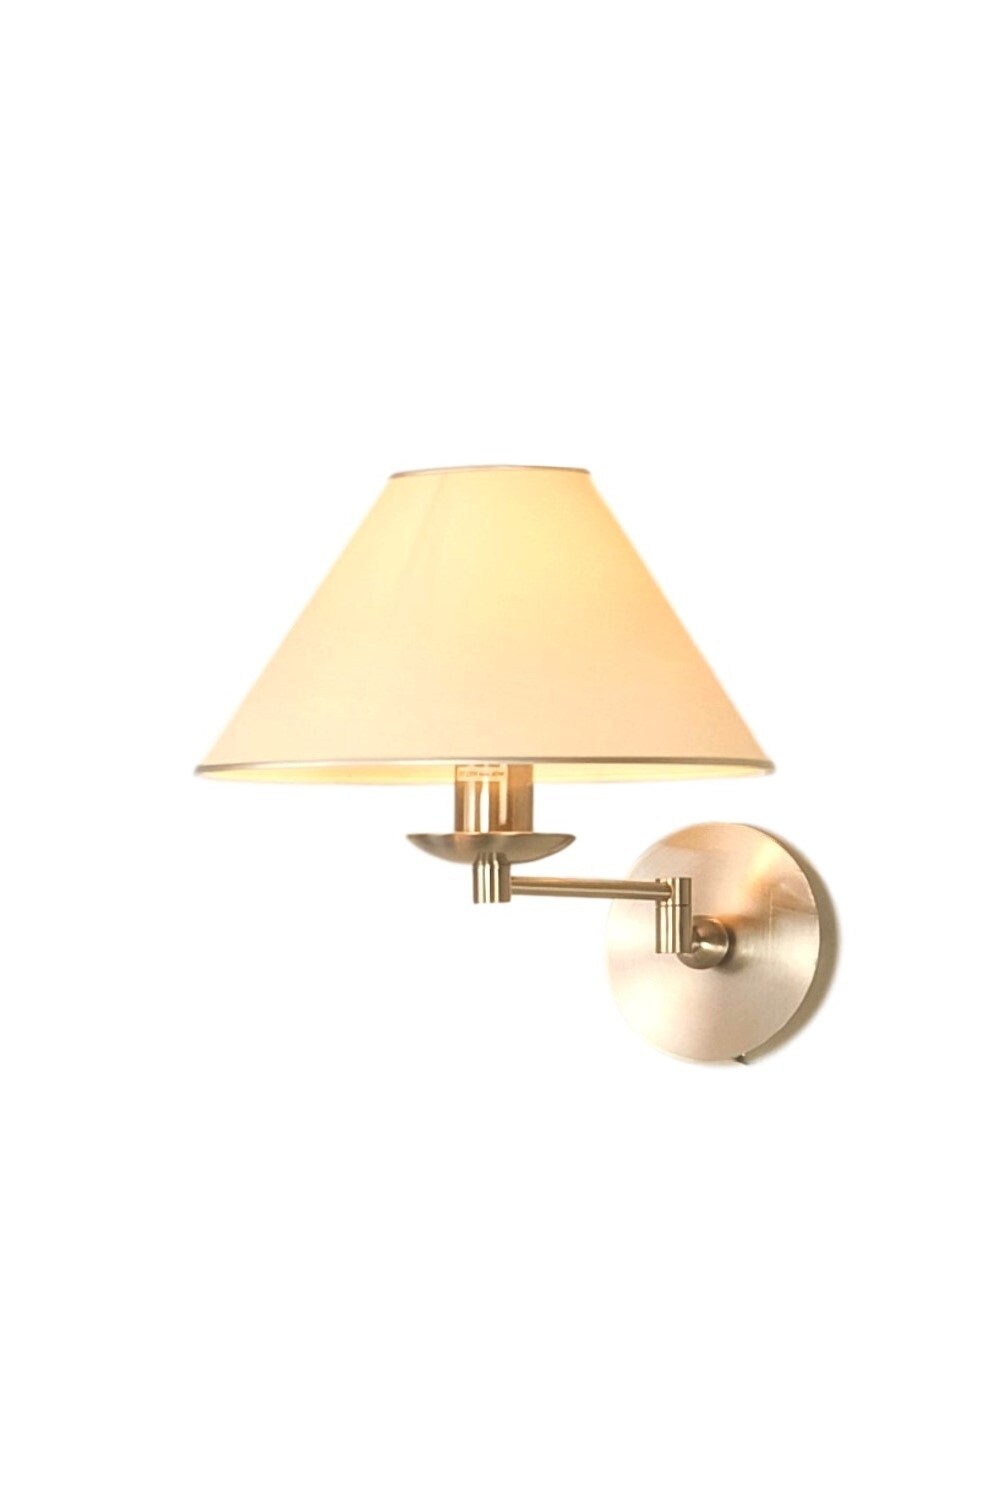 LIVING contemporary Wall Lamp 1xE27 Nickel